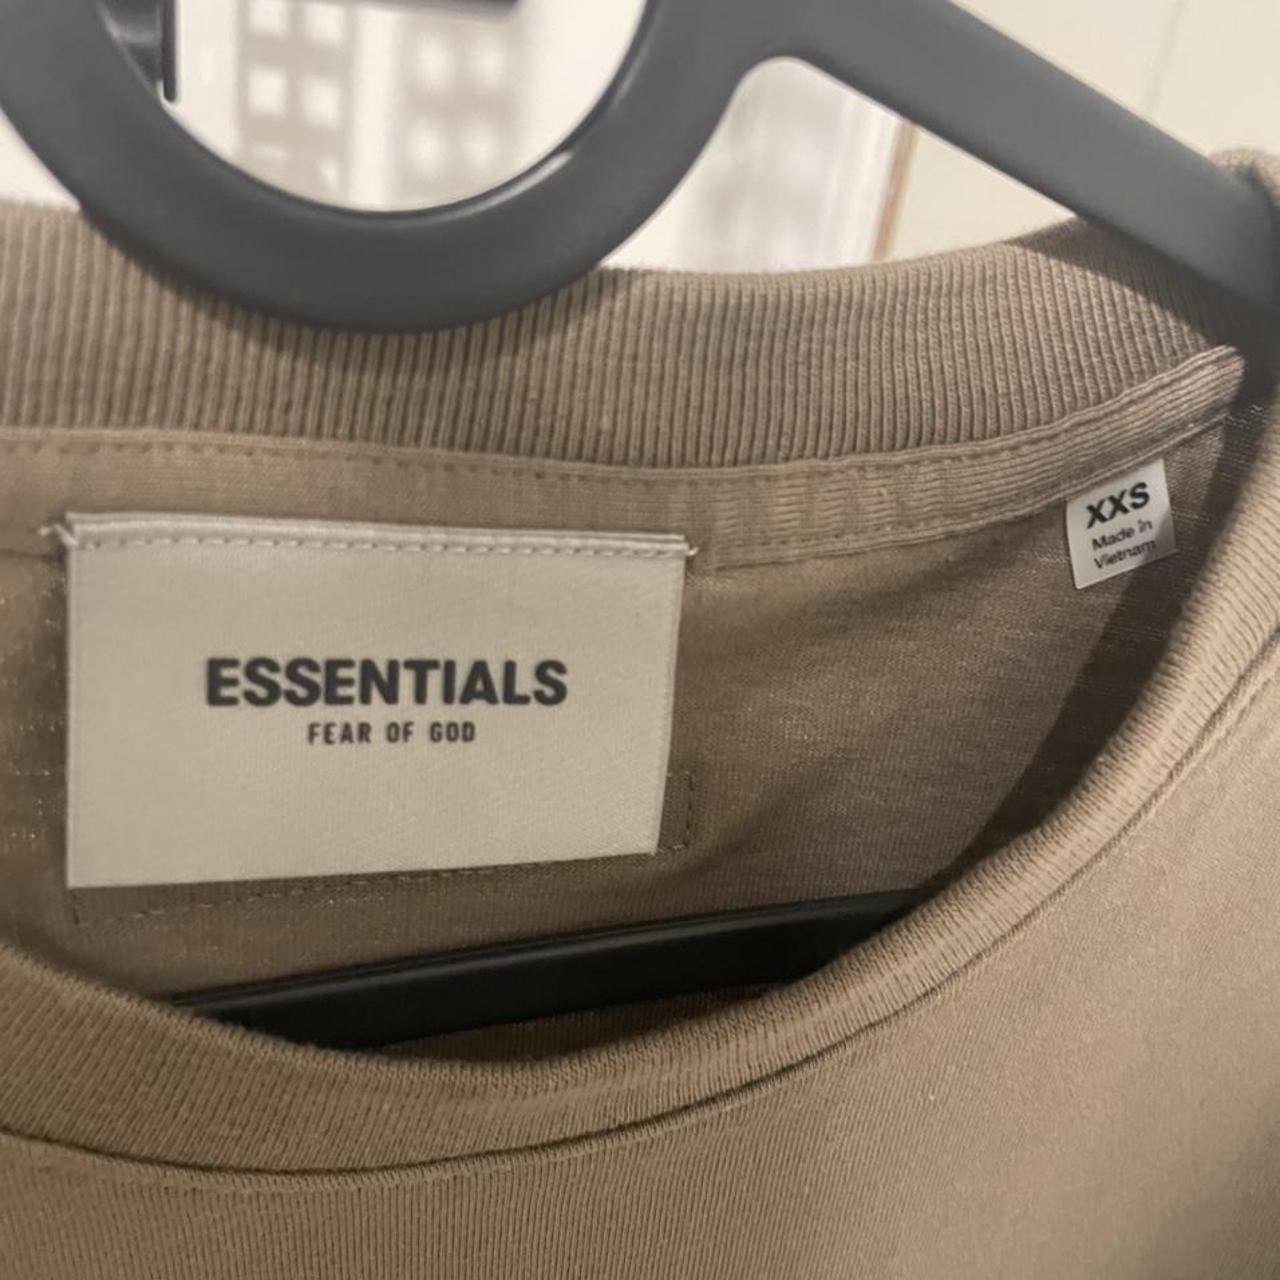 Product Image 3 - FEAR OF GOD ESSENTIALS TEE
Logo-Print